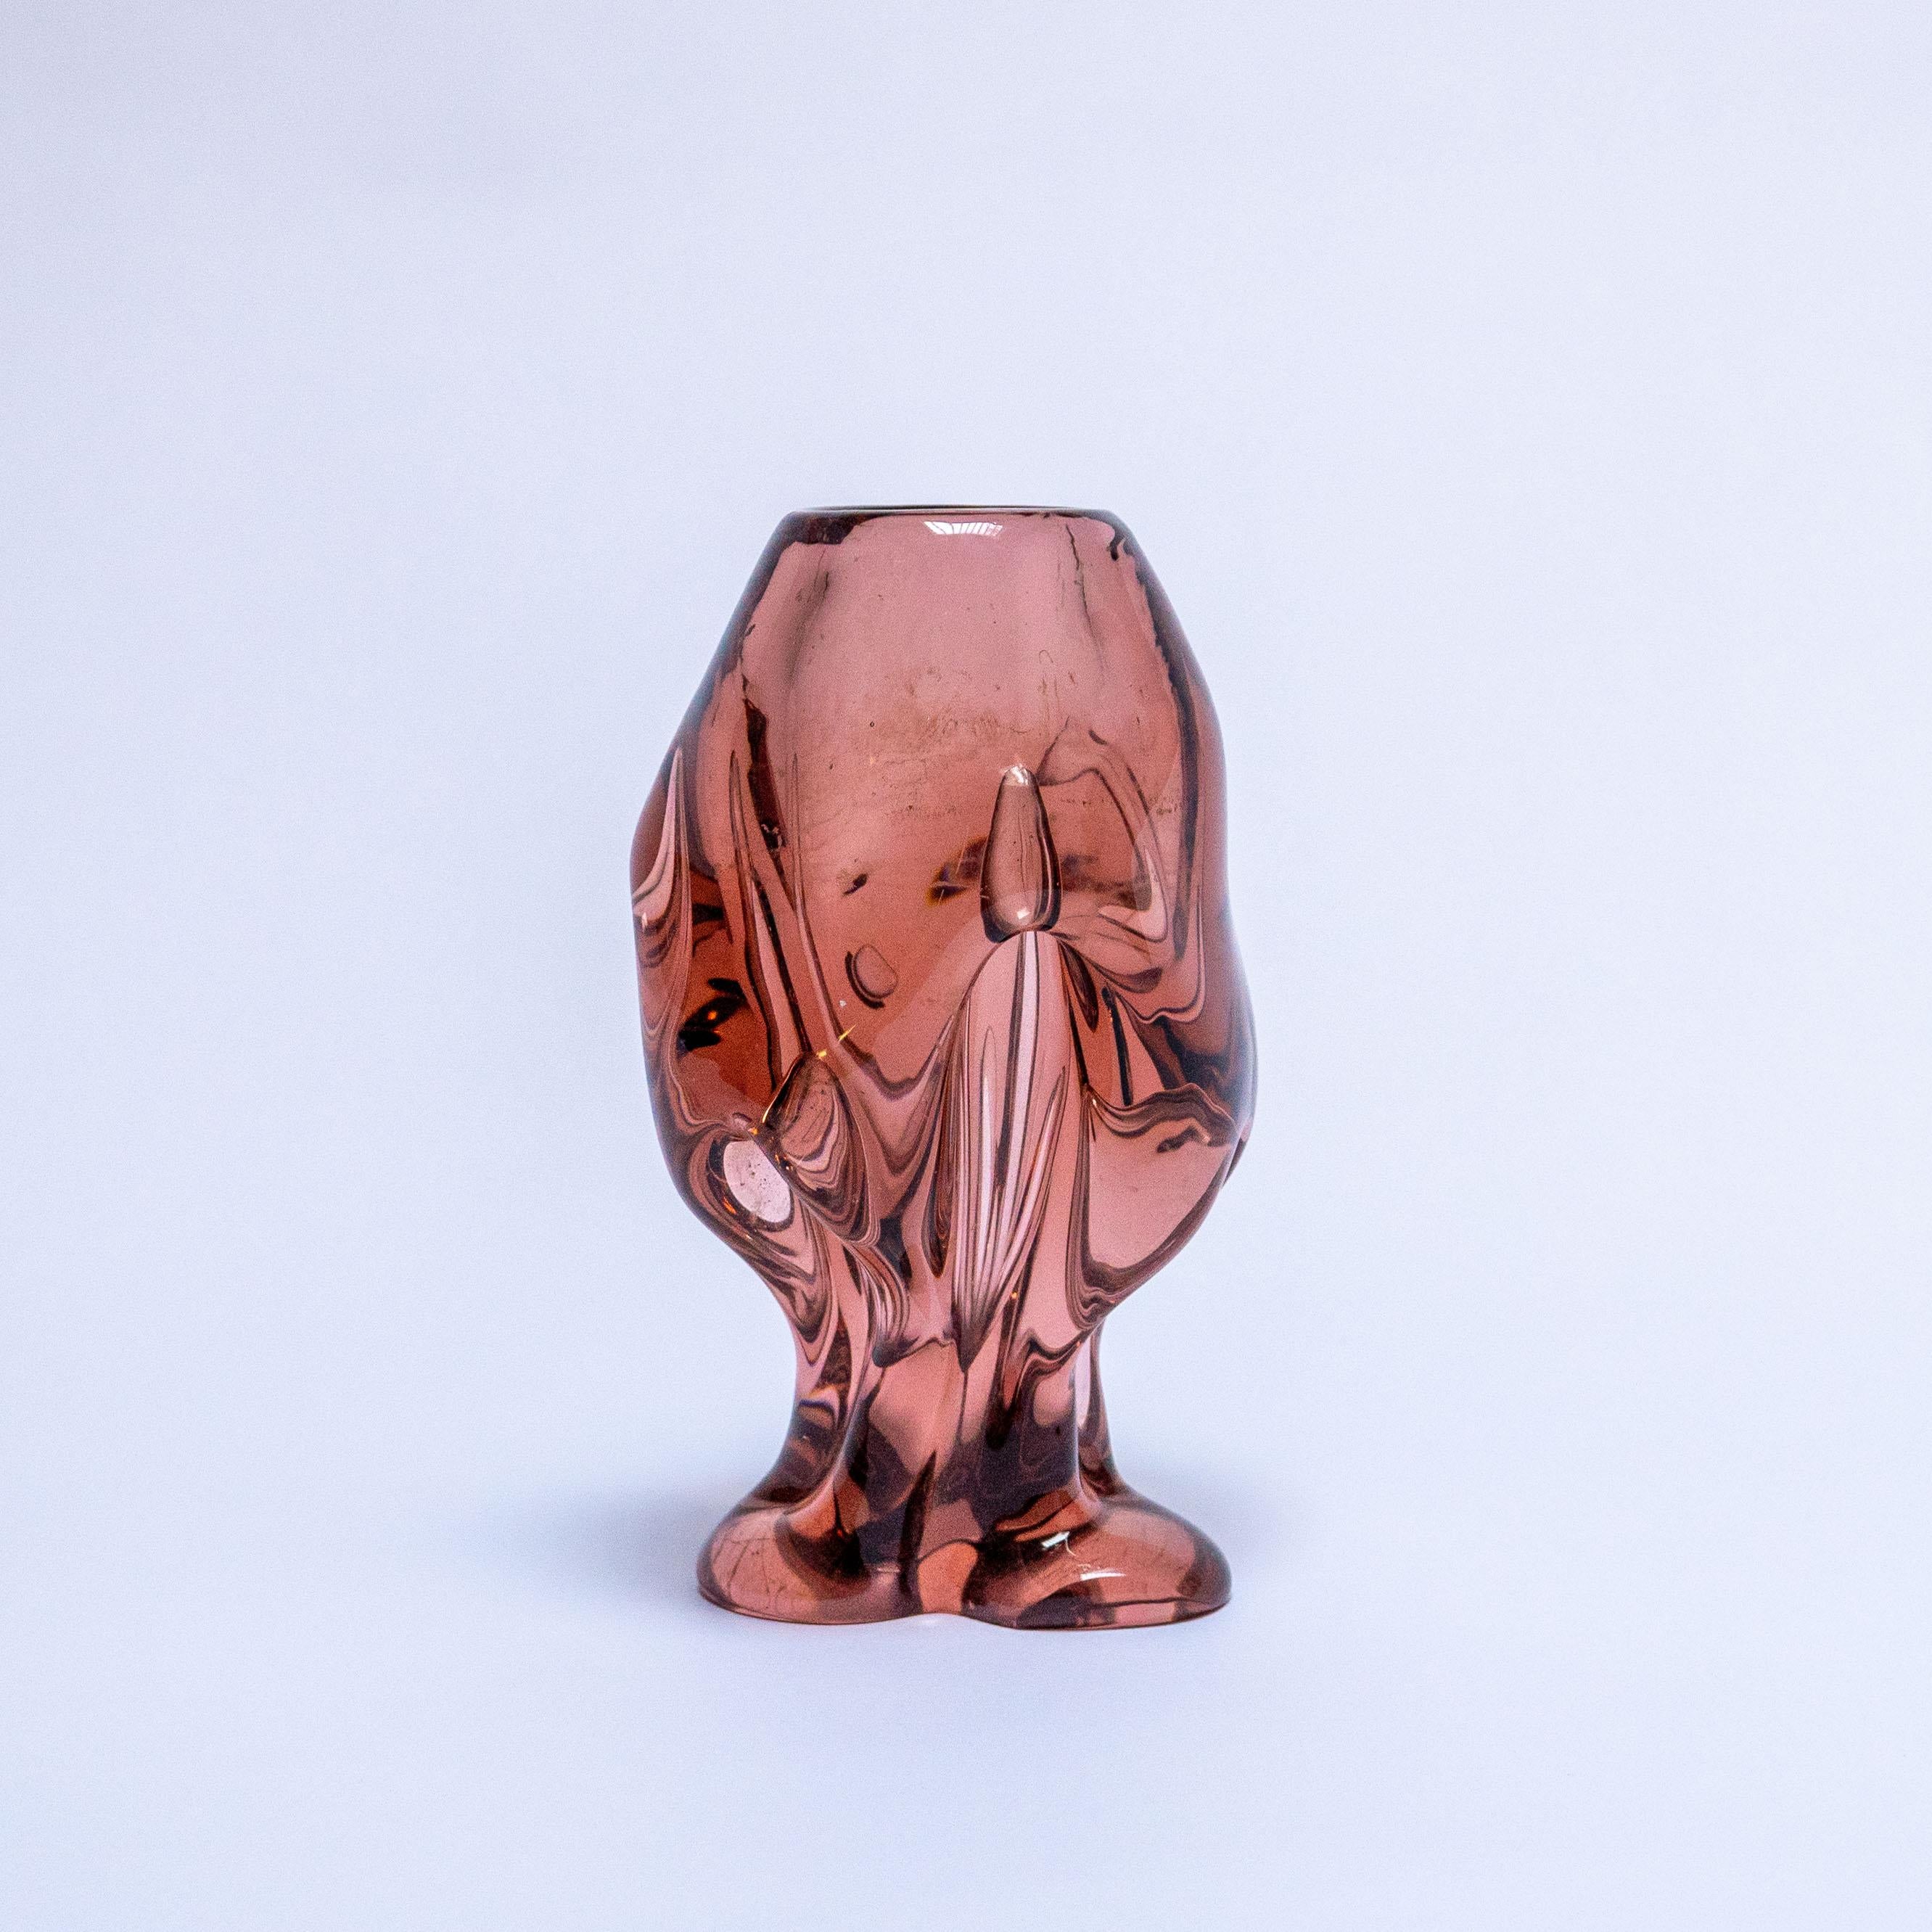 Up for sale is a massive Murano glass sculpture from the 1960s. With its wavy shapes, it resembles some abstract paintings or even some funny characters from cartoons and TV shows. 

It is hollow inside and can therefore be used as a vase, but it is